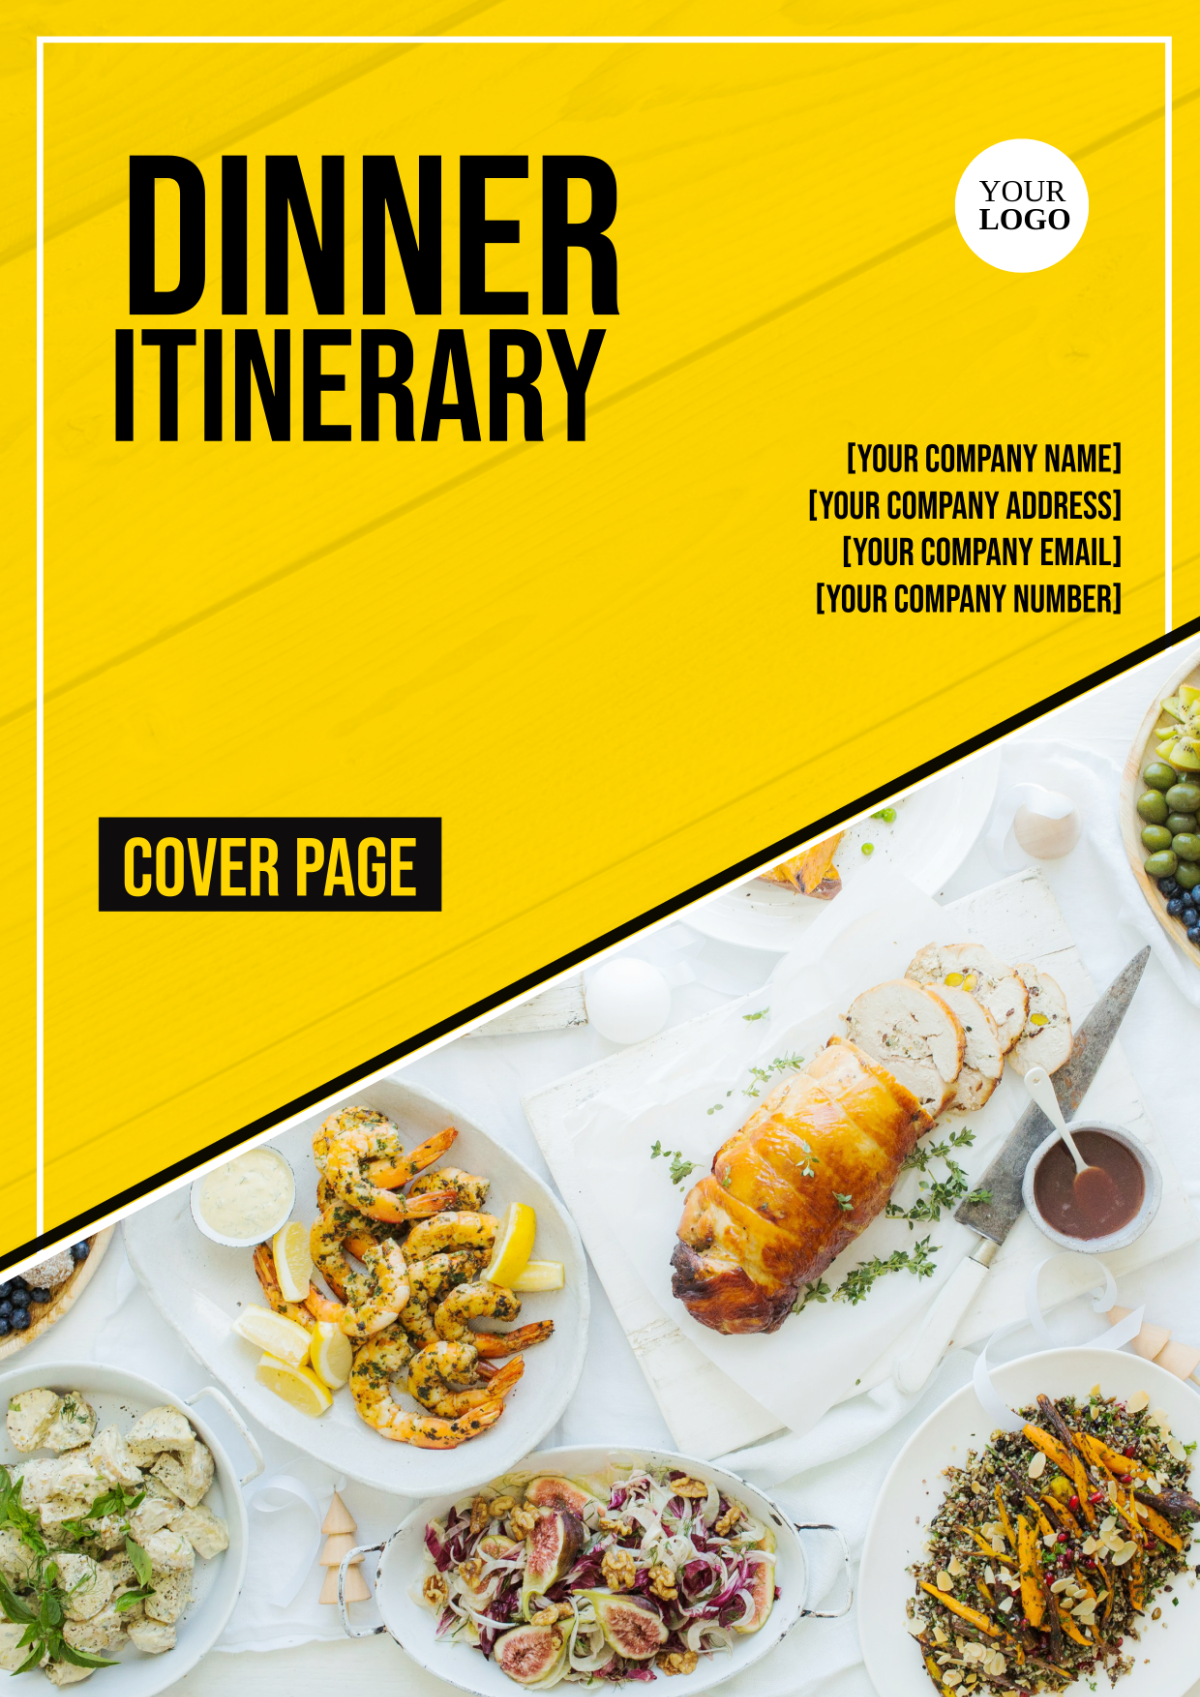 Dinner Itinerary Cover Page